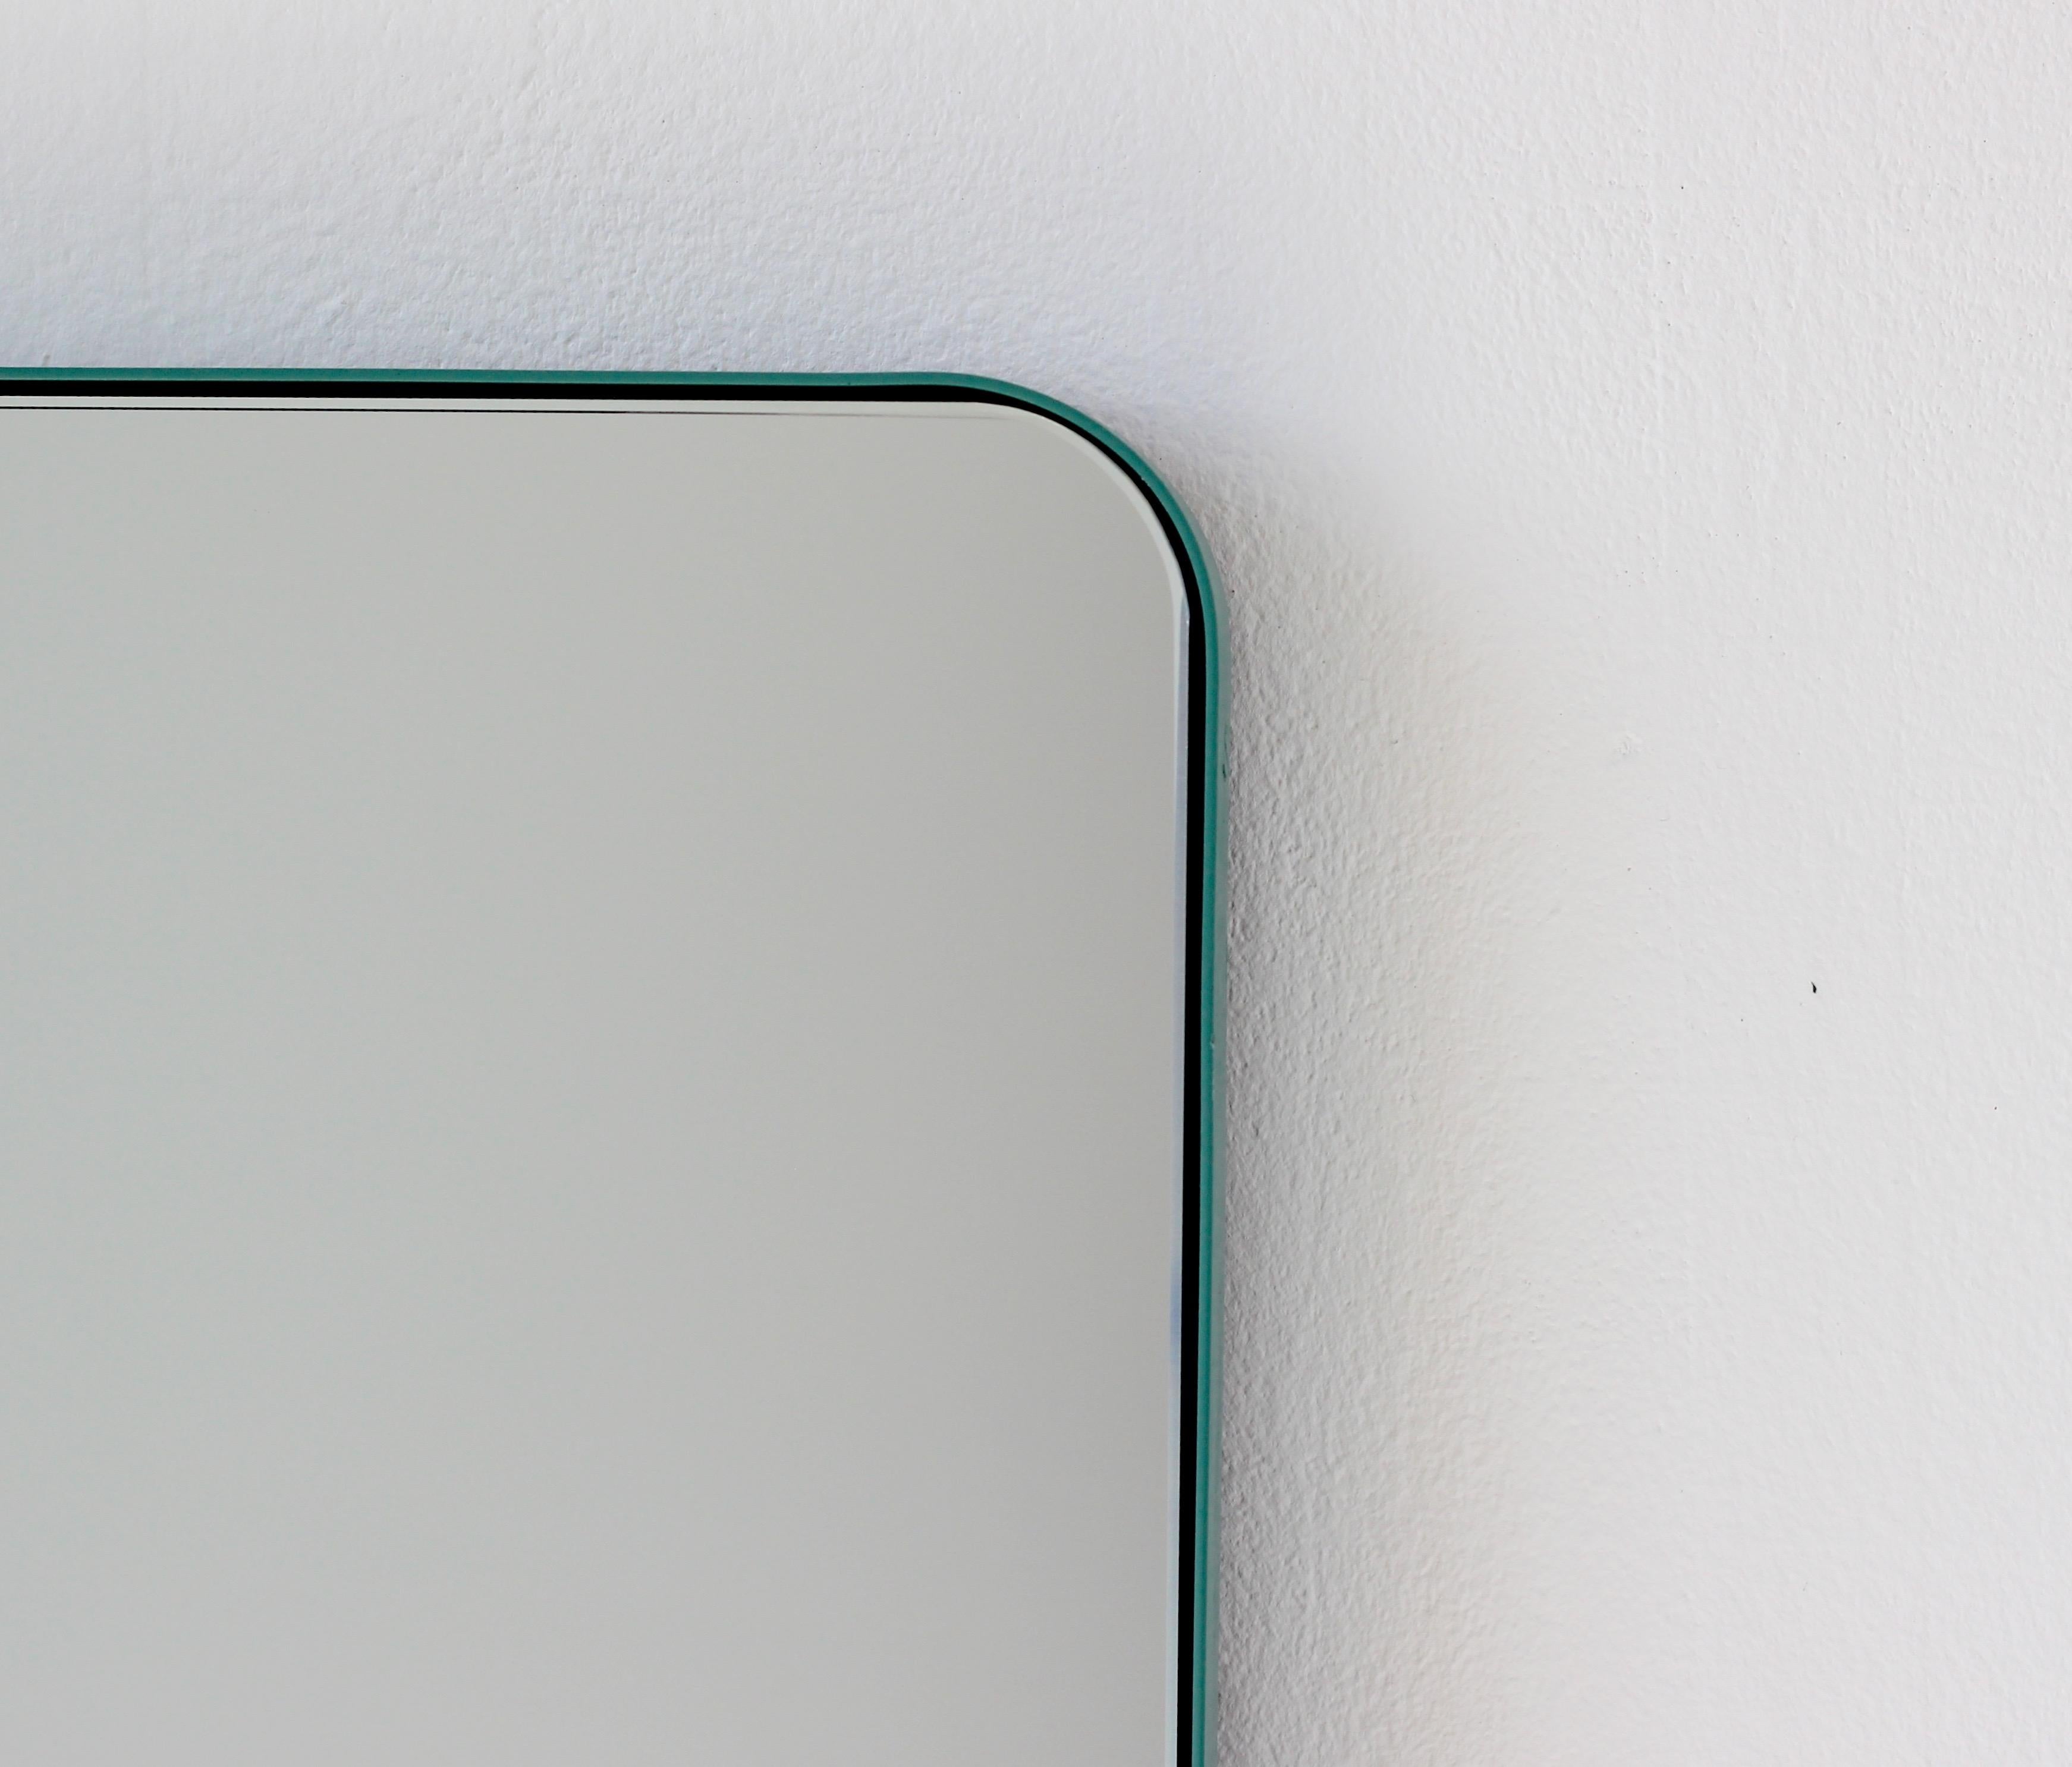 Quadris Rectangular Modern Wall Mirror with a Mint Turquoise Frame, Small In New Condition For Sale In London, GB